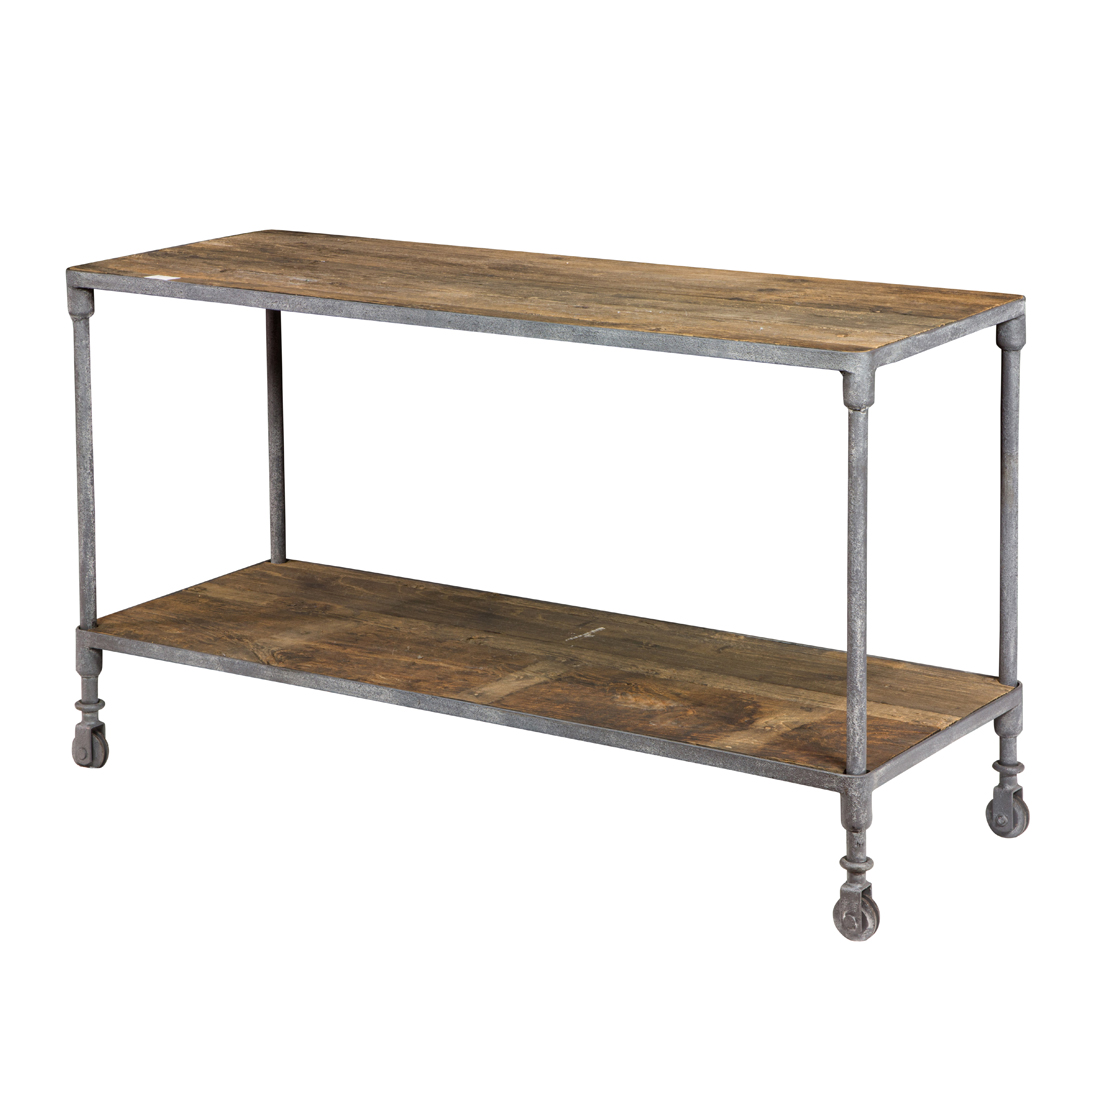 AN INDUSTRIAL STYLE TIERED CONSOLE 3cdb15